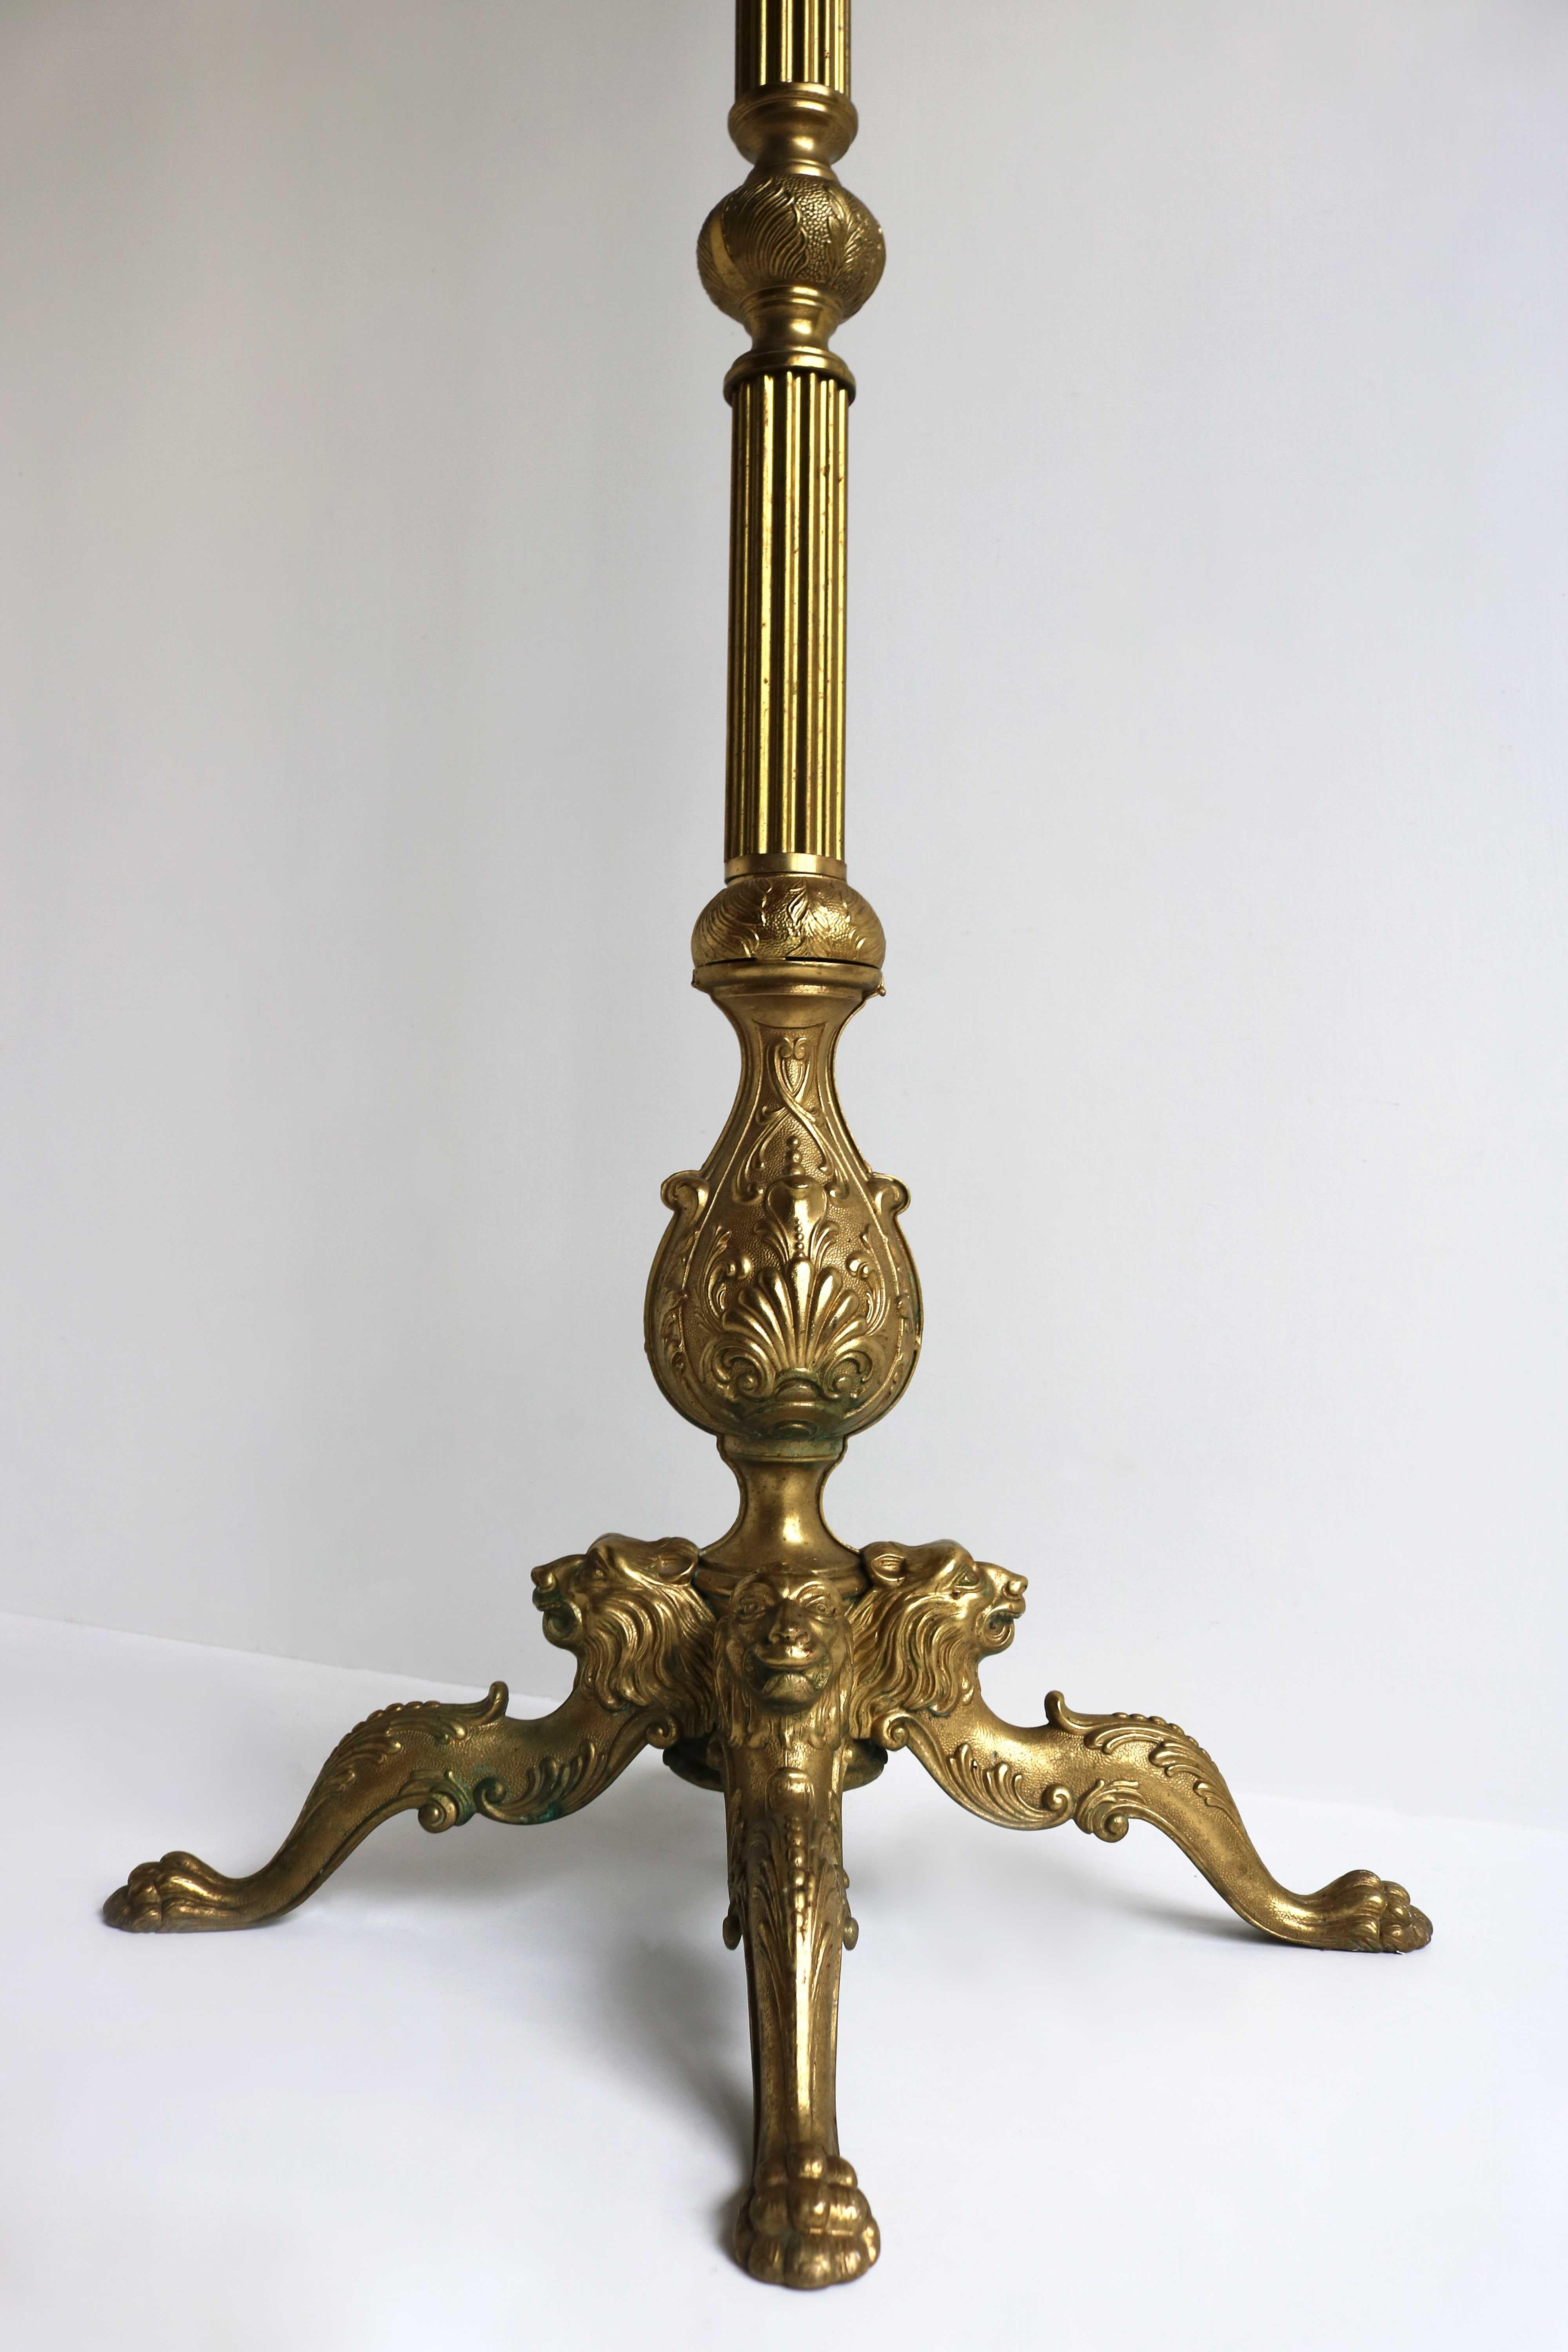 Hollywood Regency Mid-Century Brass Italian Coat Hat Rack Hall Tree Stand Lions Heads Claw Foot